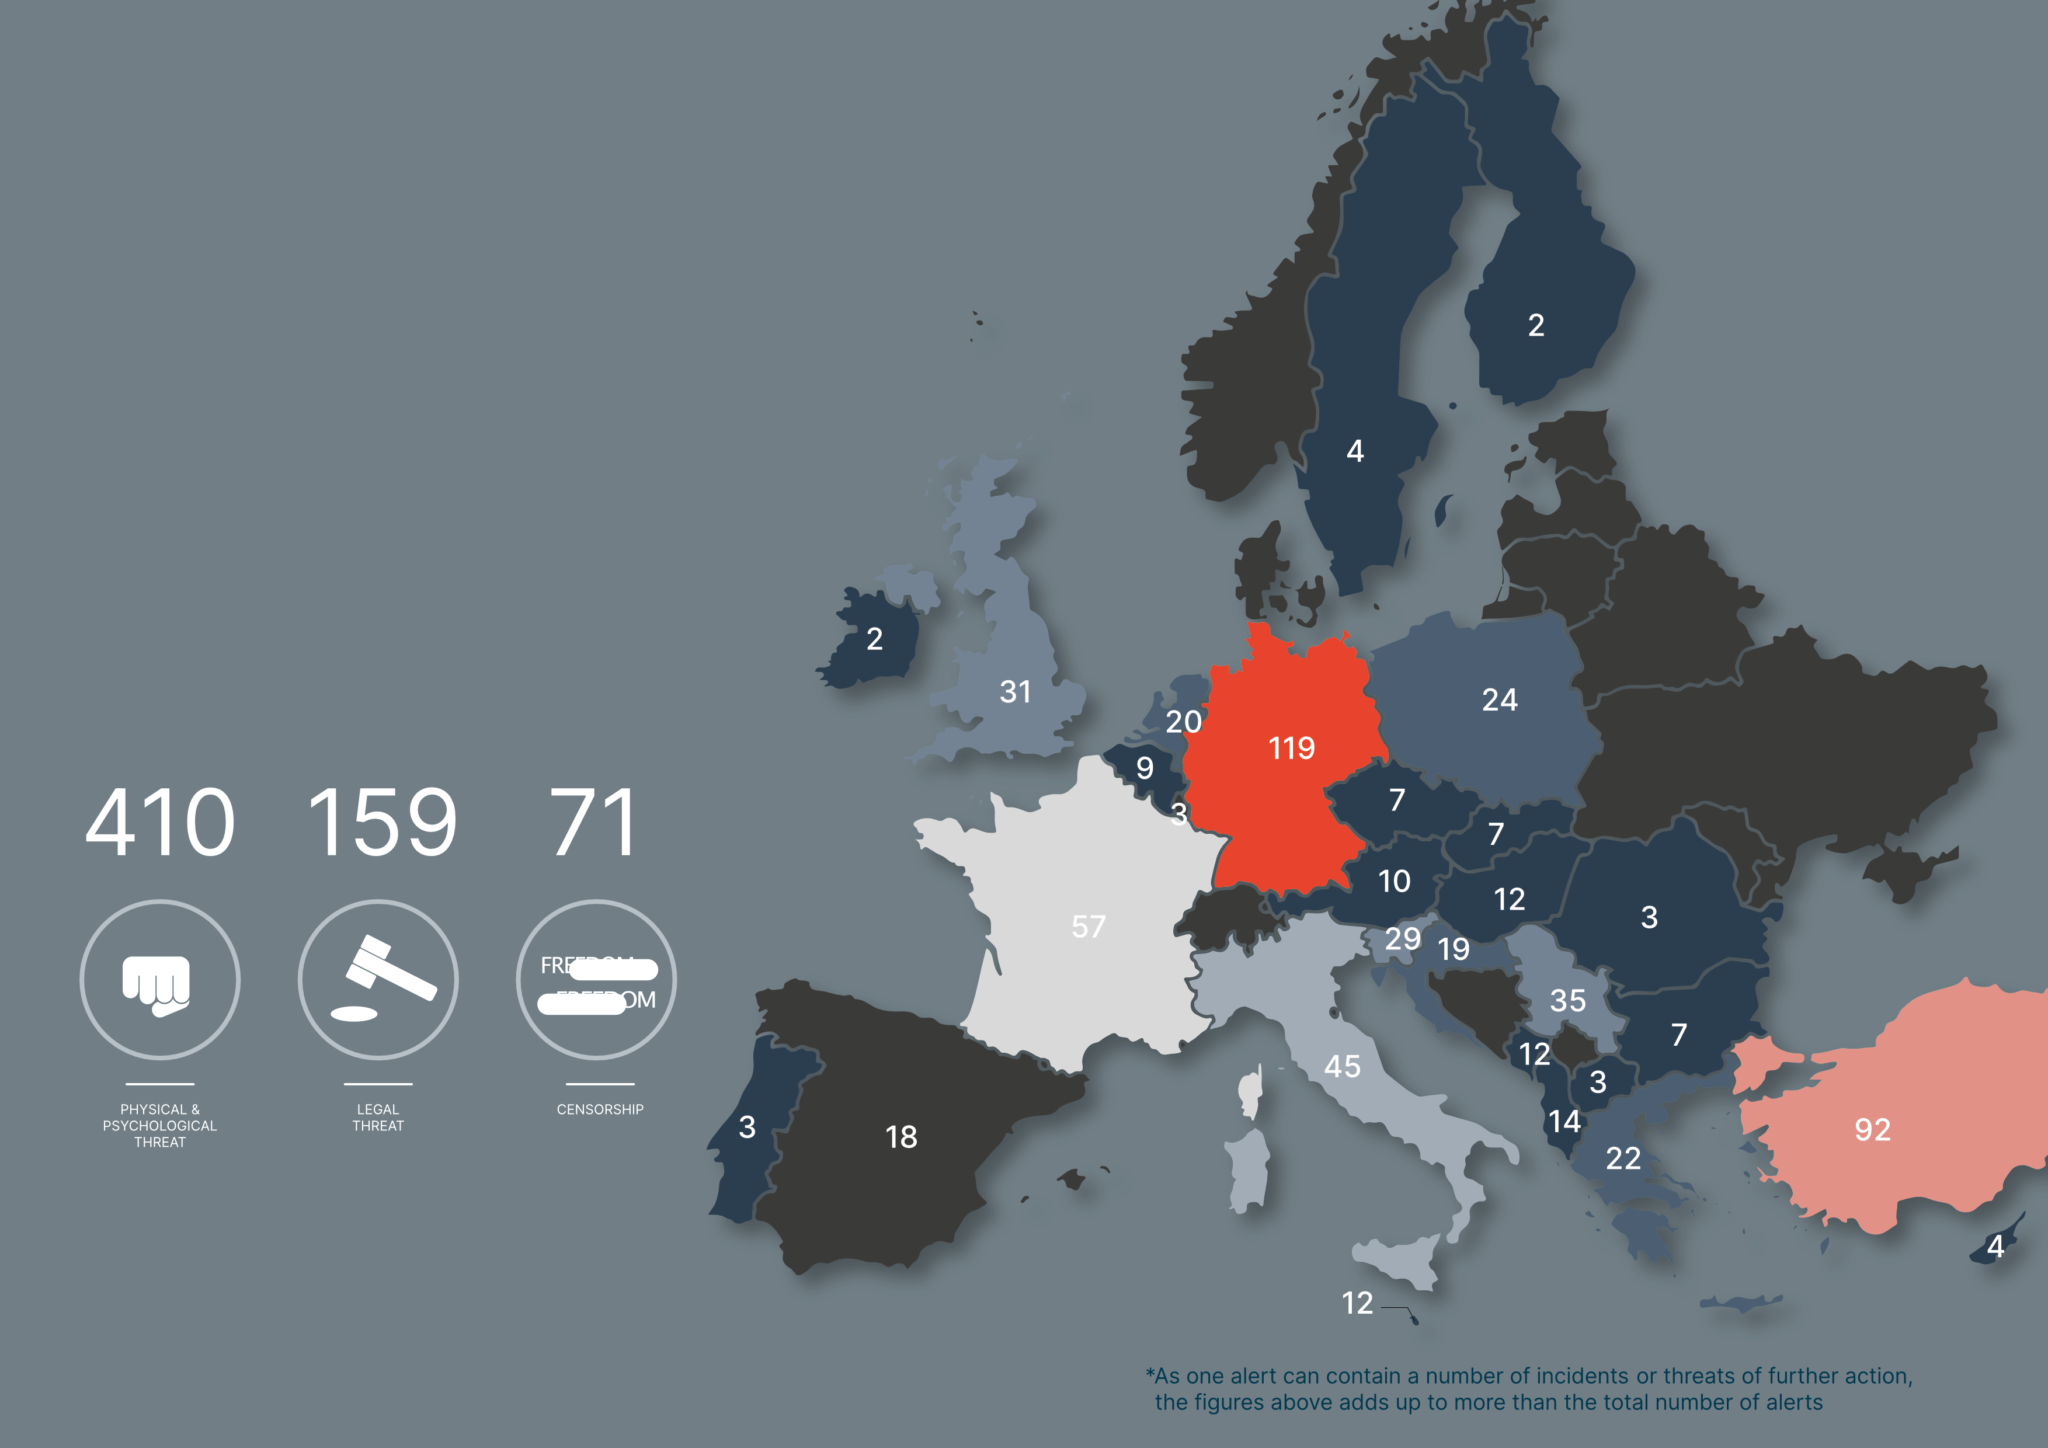 From January to December 2021, 626 alerts were documented on Mapping Media Freedom (MapMF), ranging from verbal attacks to legal incidents. These alerts affected 1,063 individuals or media entities in 30 countries. The violations include the murders of three journalists: investigative journalist Peter R. de Vries in the Netherlands, veteran crime reporter Giorgos Karaivaz in Greece, and local radio presenter Hazım Özsu in Turkey.